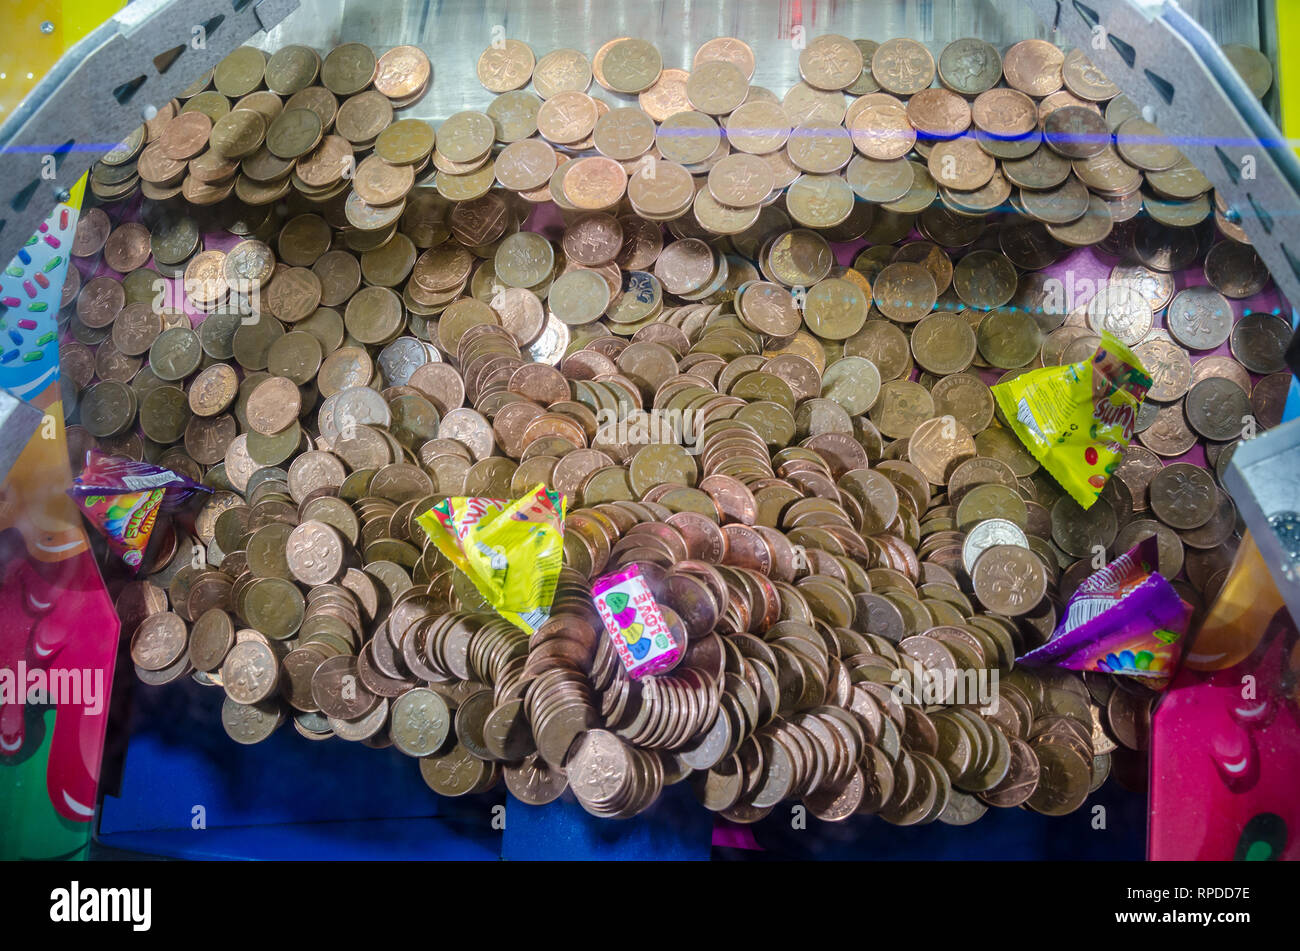 A two penny falls game where two pence piece coins balance precariously on the edge of a lower shelf waiting to be knocked off and won. Stock Photo